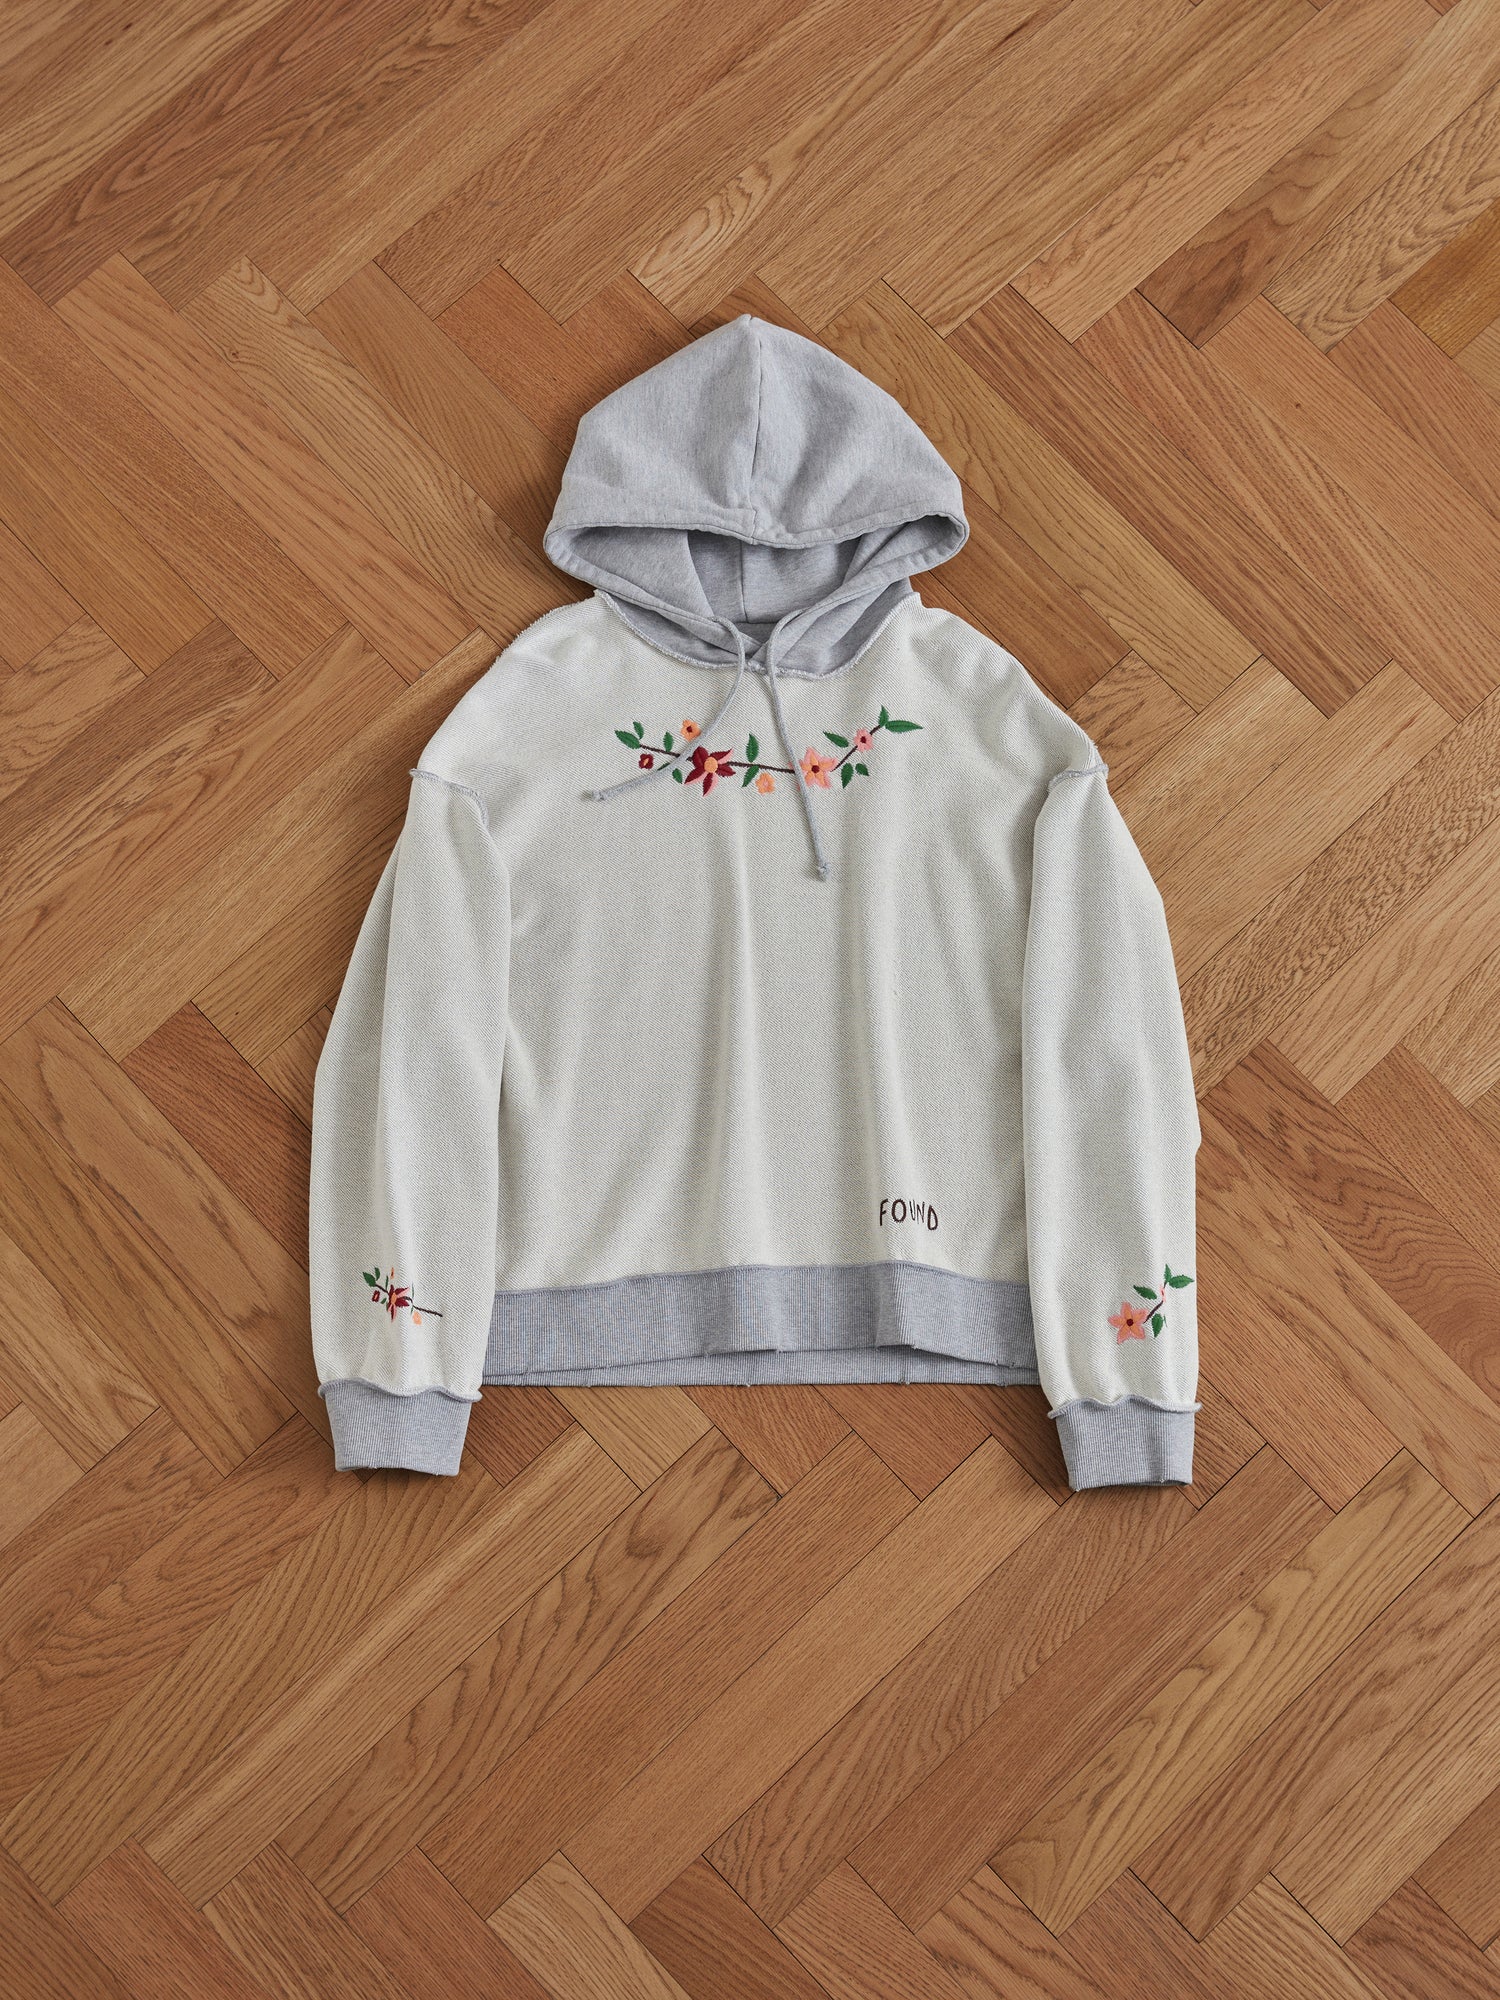 A Found Inverse Flower Petal Hoodie with embroidered flowers on it, made from french terry fabric.